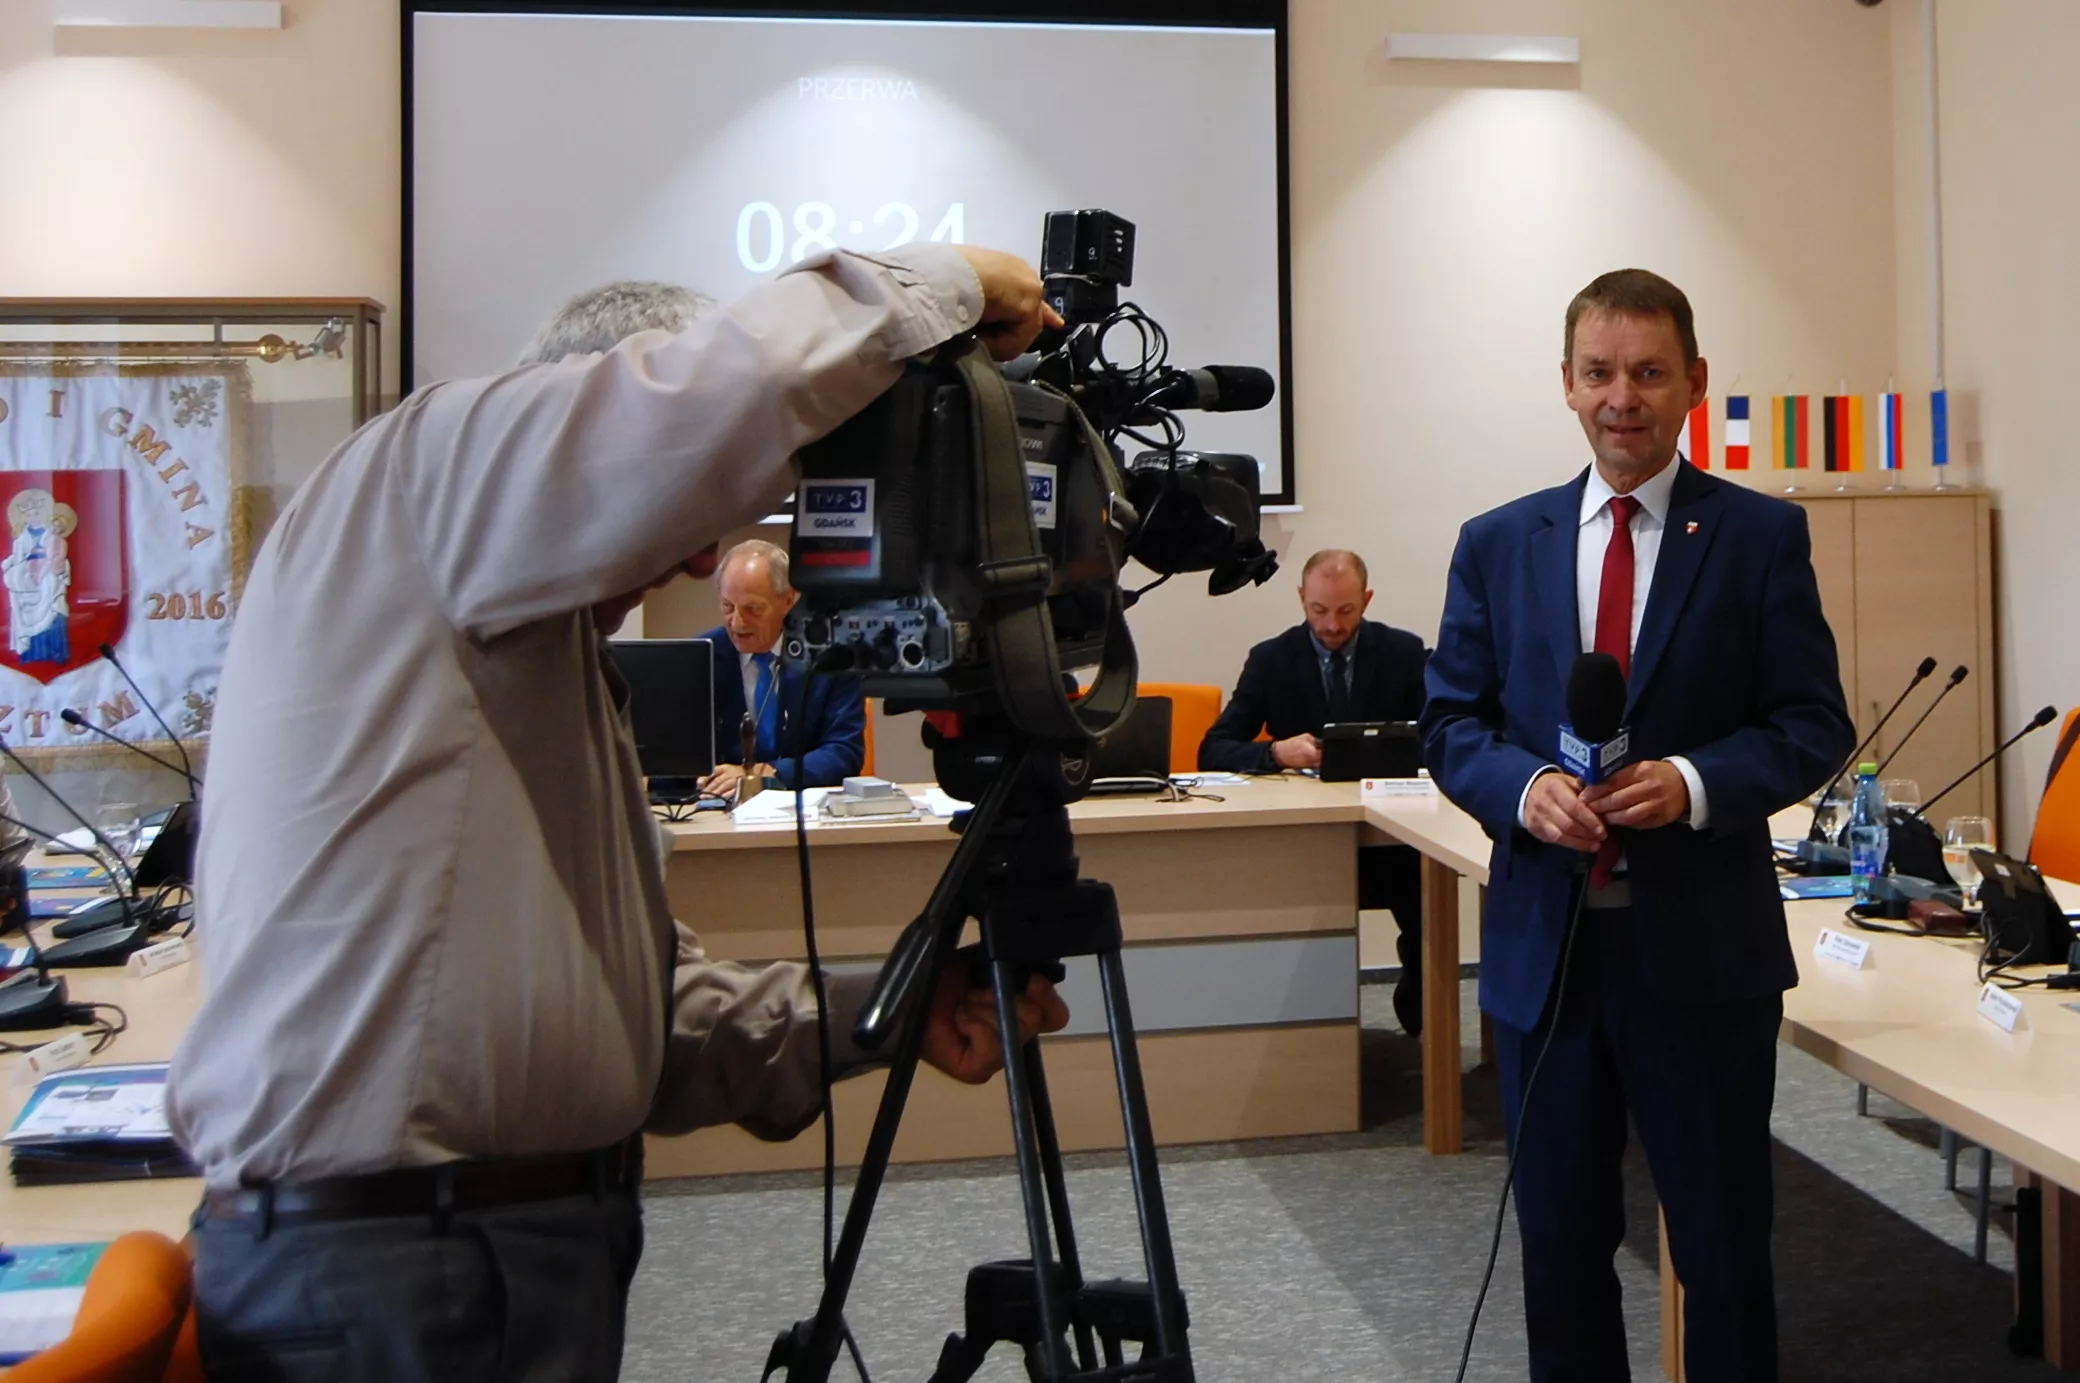 2019/10/L.Tabor-mayor-of-sztum-gives-the-interview-to-local-TV-of-Gdansk.©City-of-Sztum